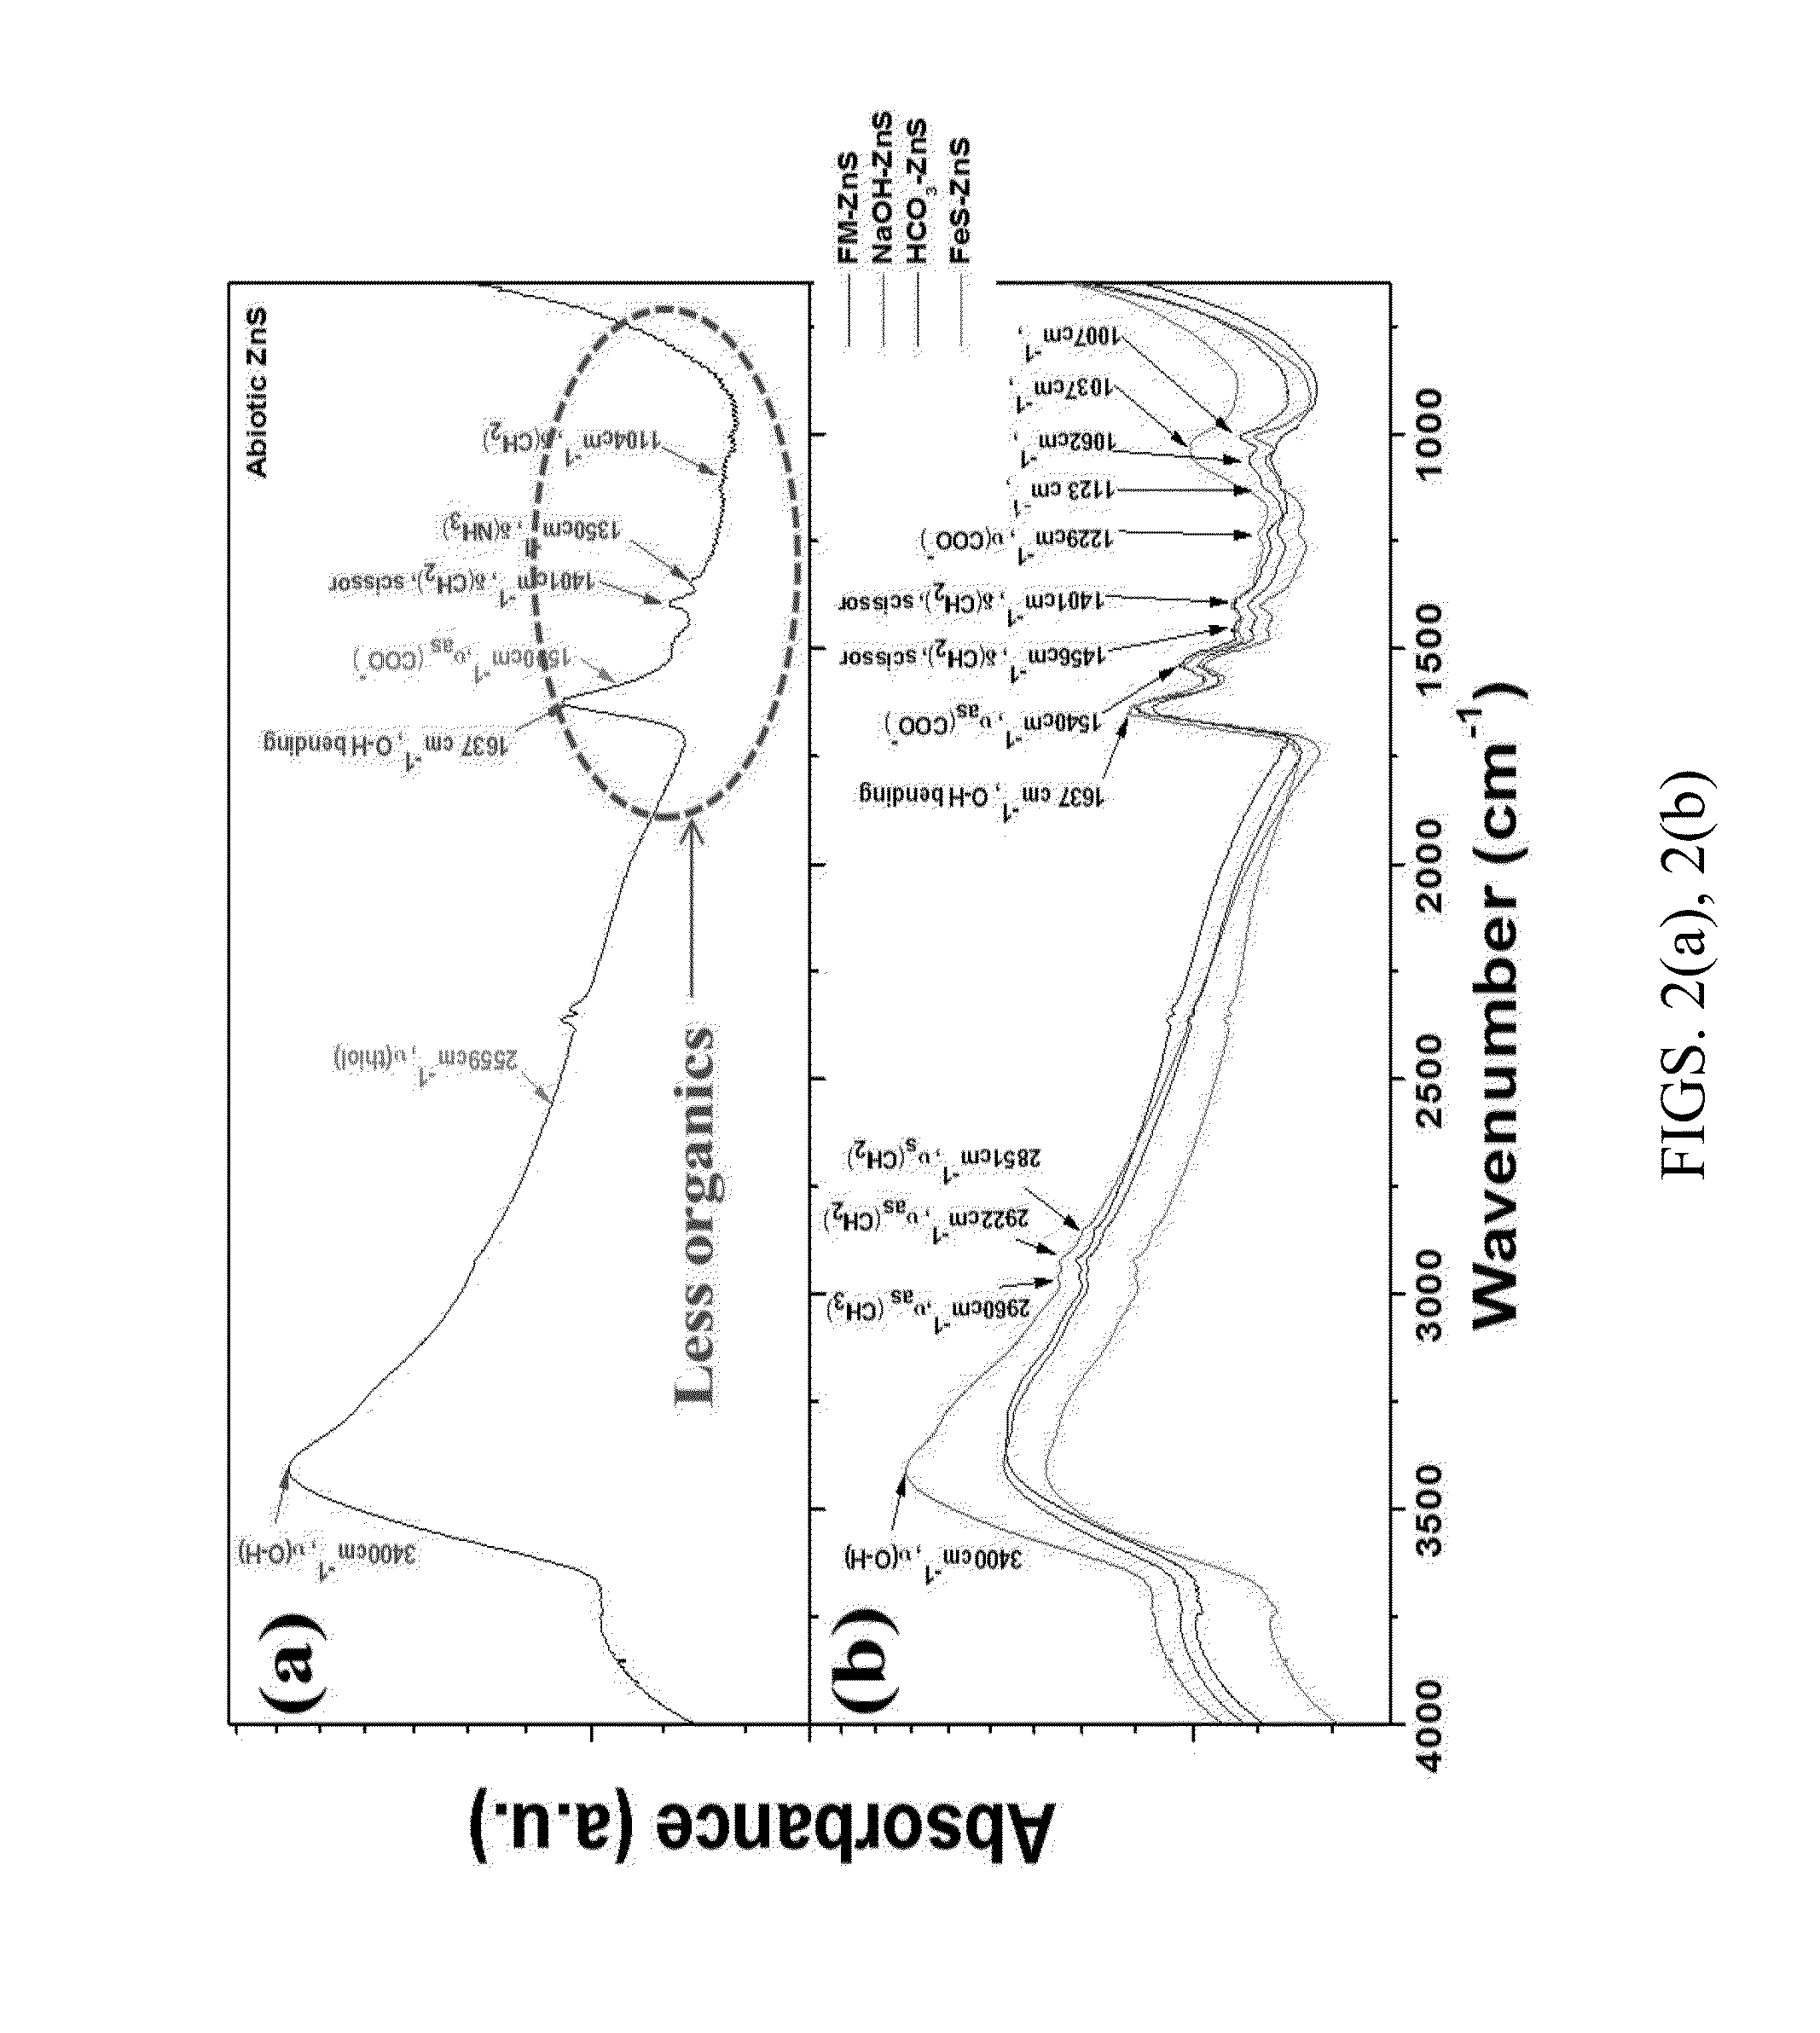 Controllable reductive method for synthesizing metal-containing particles